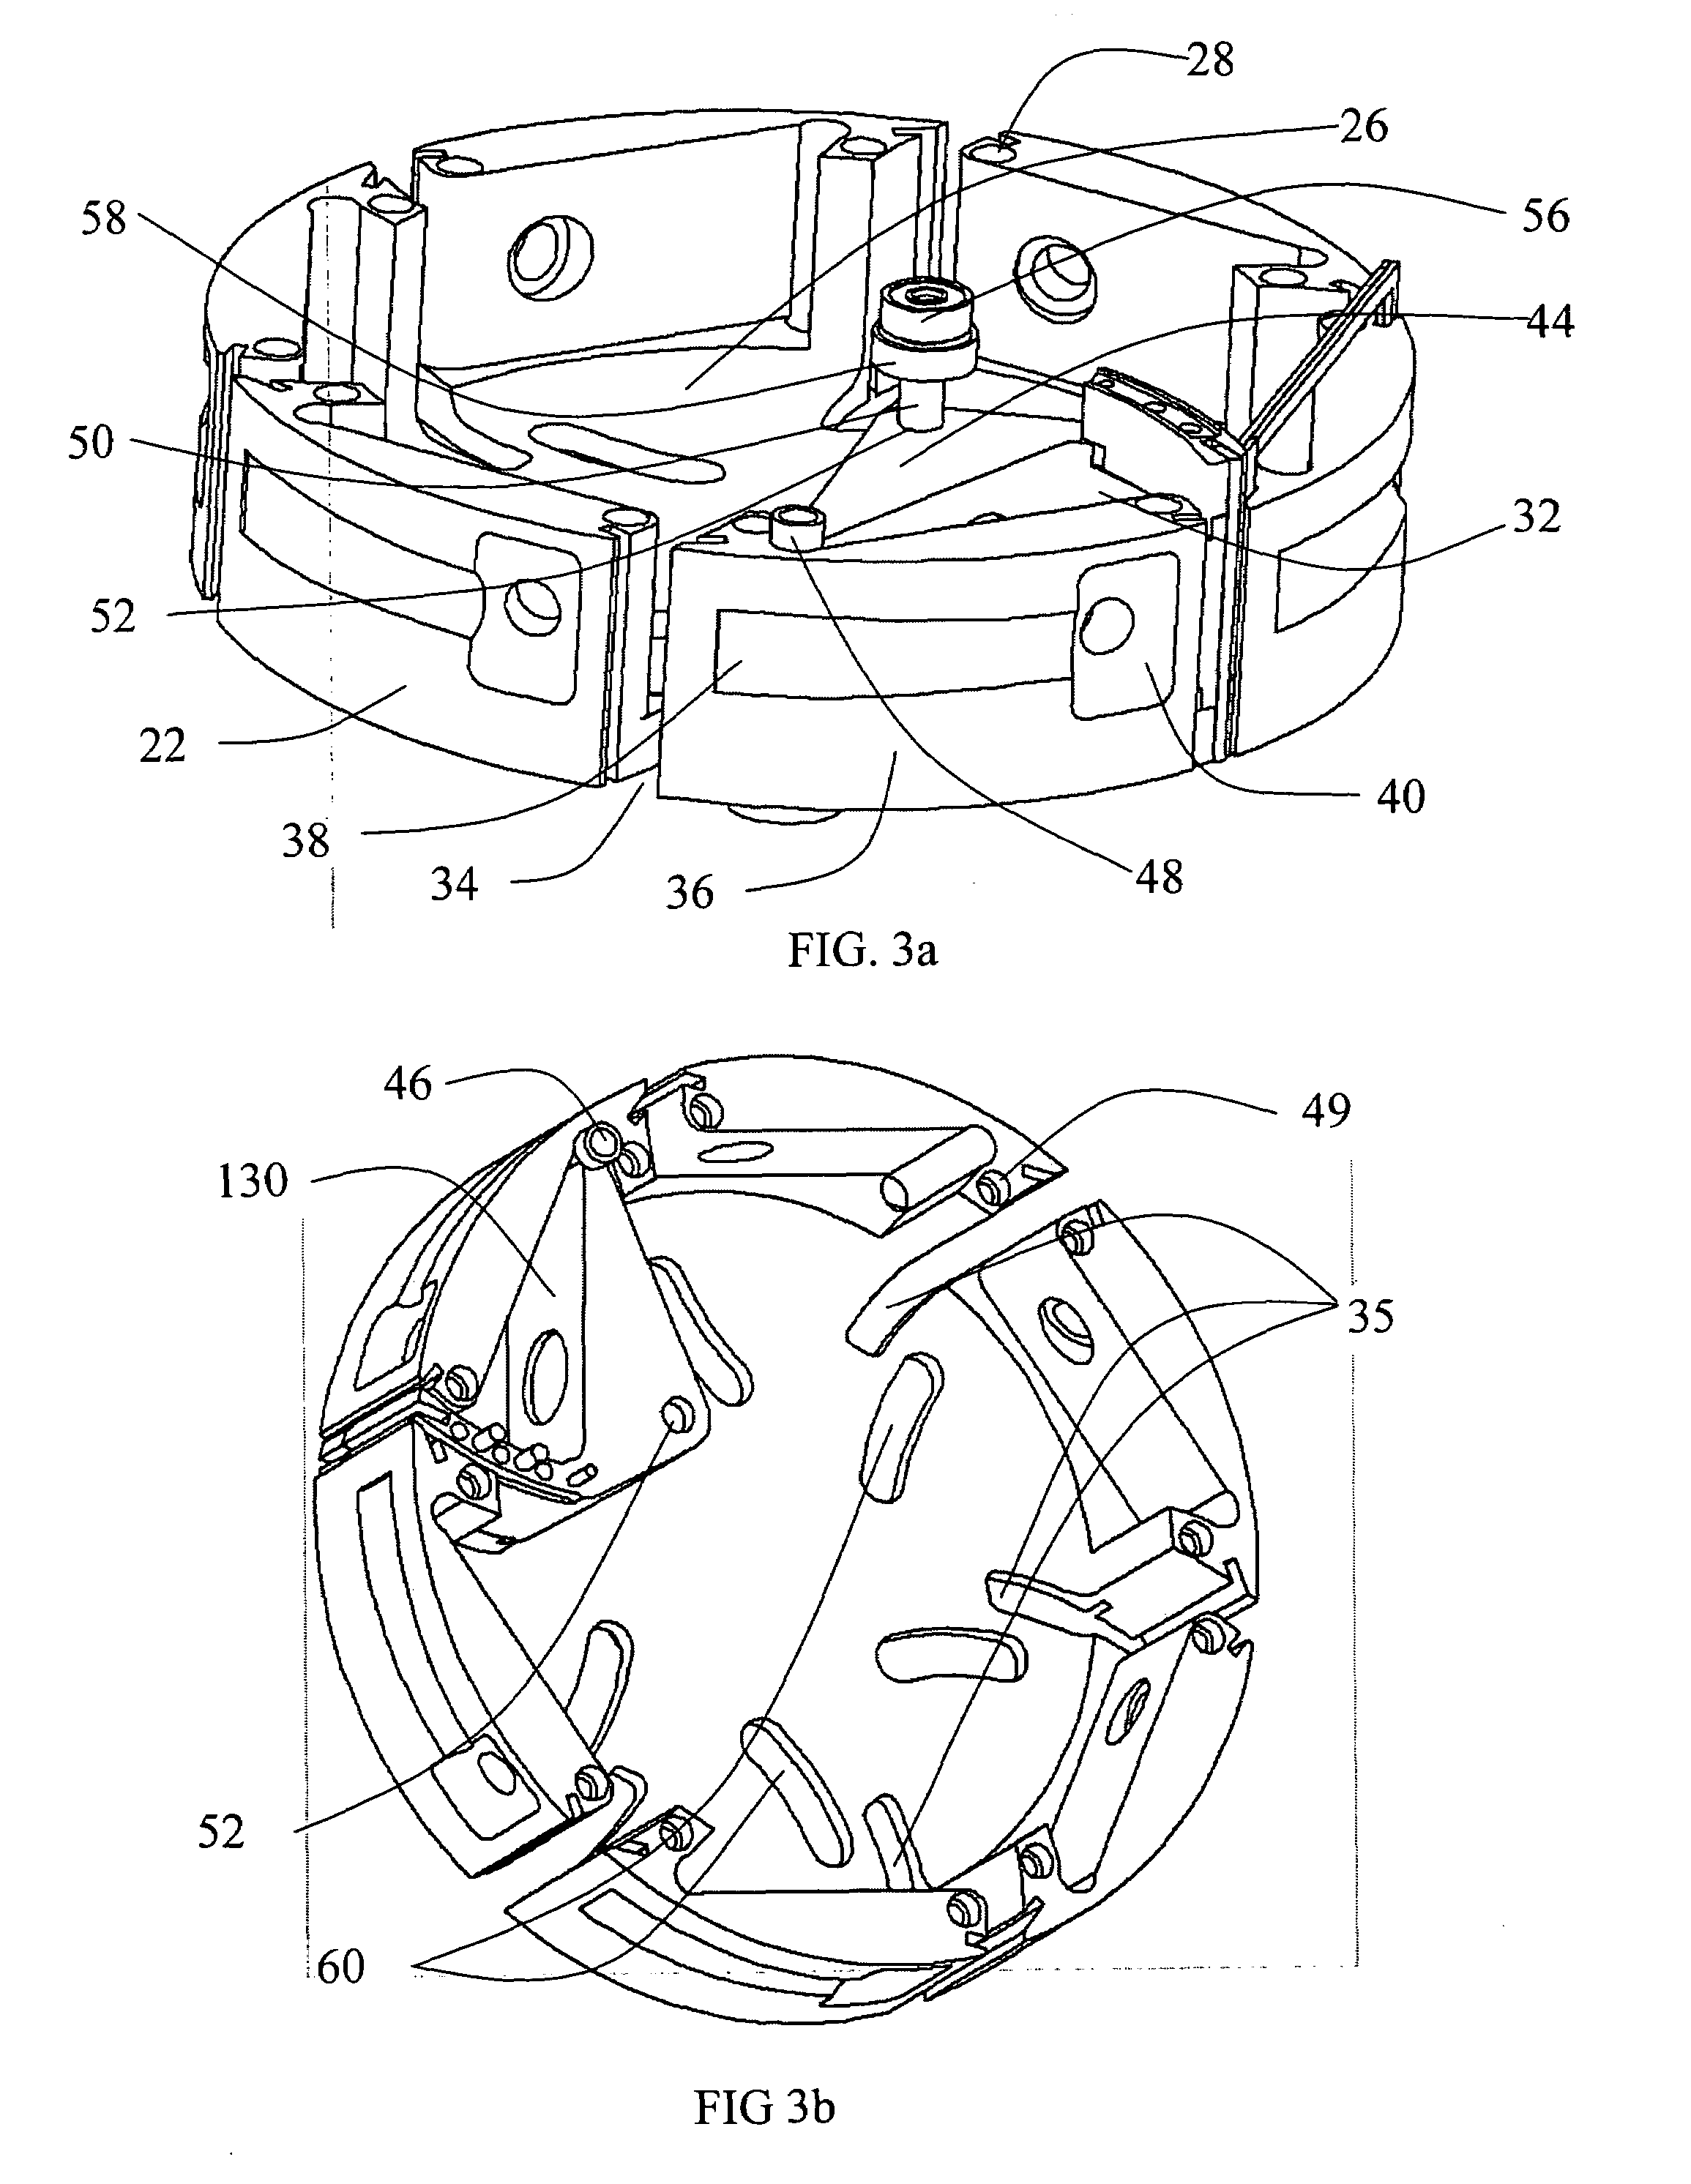 Multilobe rotary motion asymetric compression/expansion engine